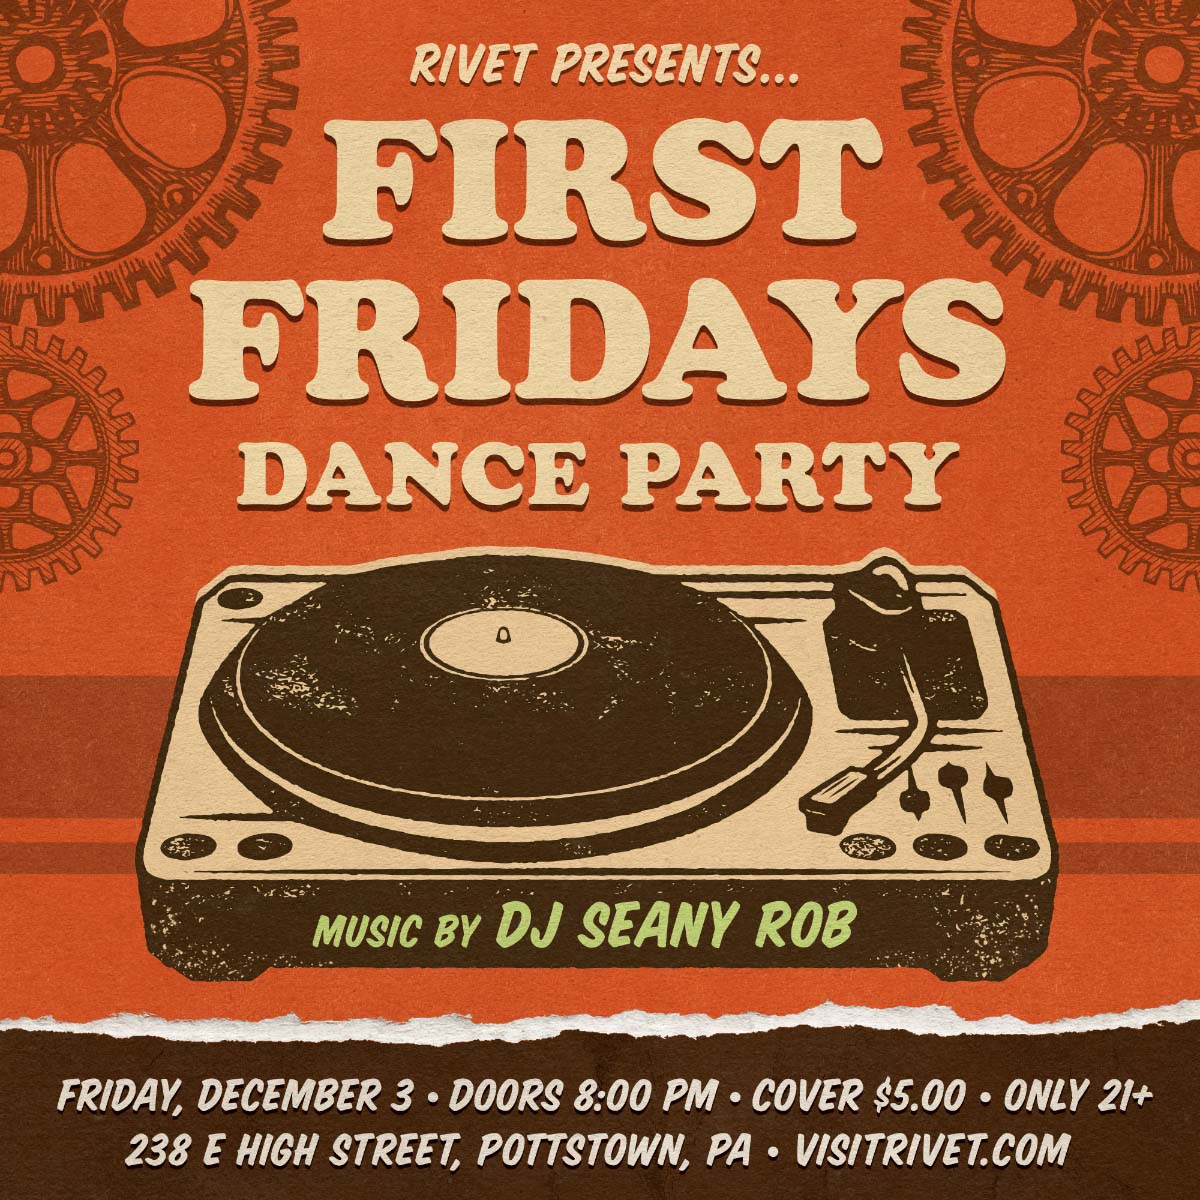 First Fridays Dance Party with DJ Seany Rob at Rivet on December 3, 2021! Try some of our great selection of local brews and vodka mixed drinks.